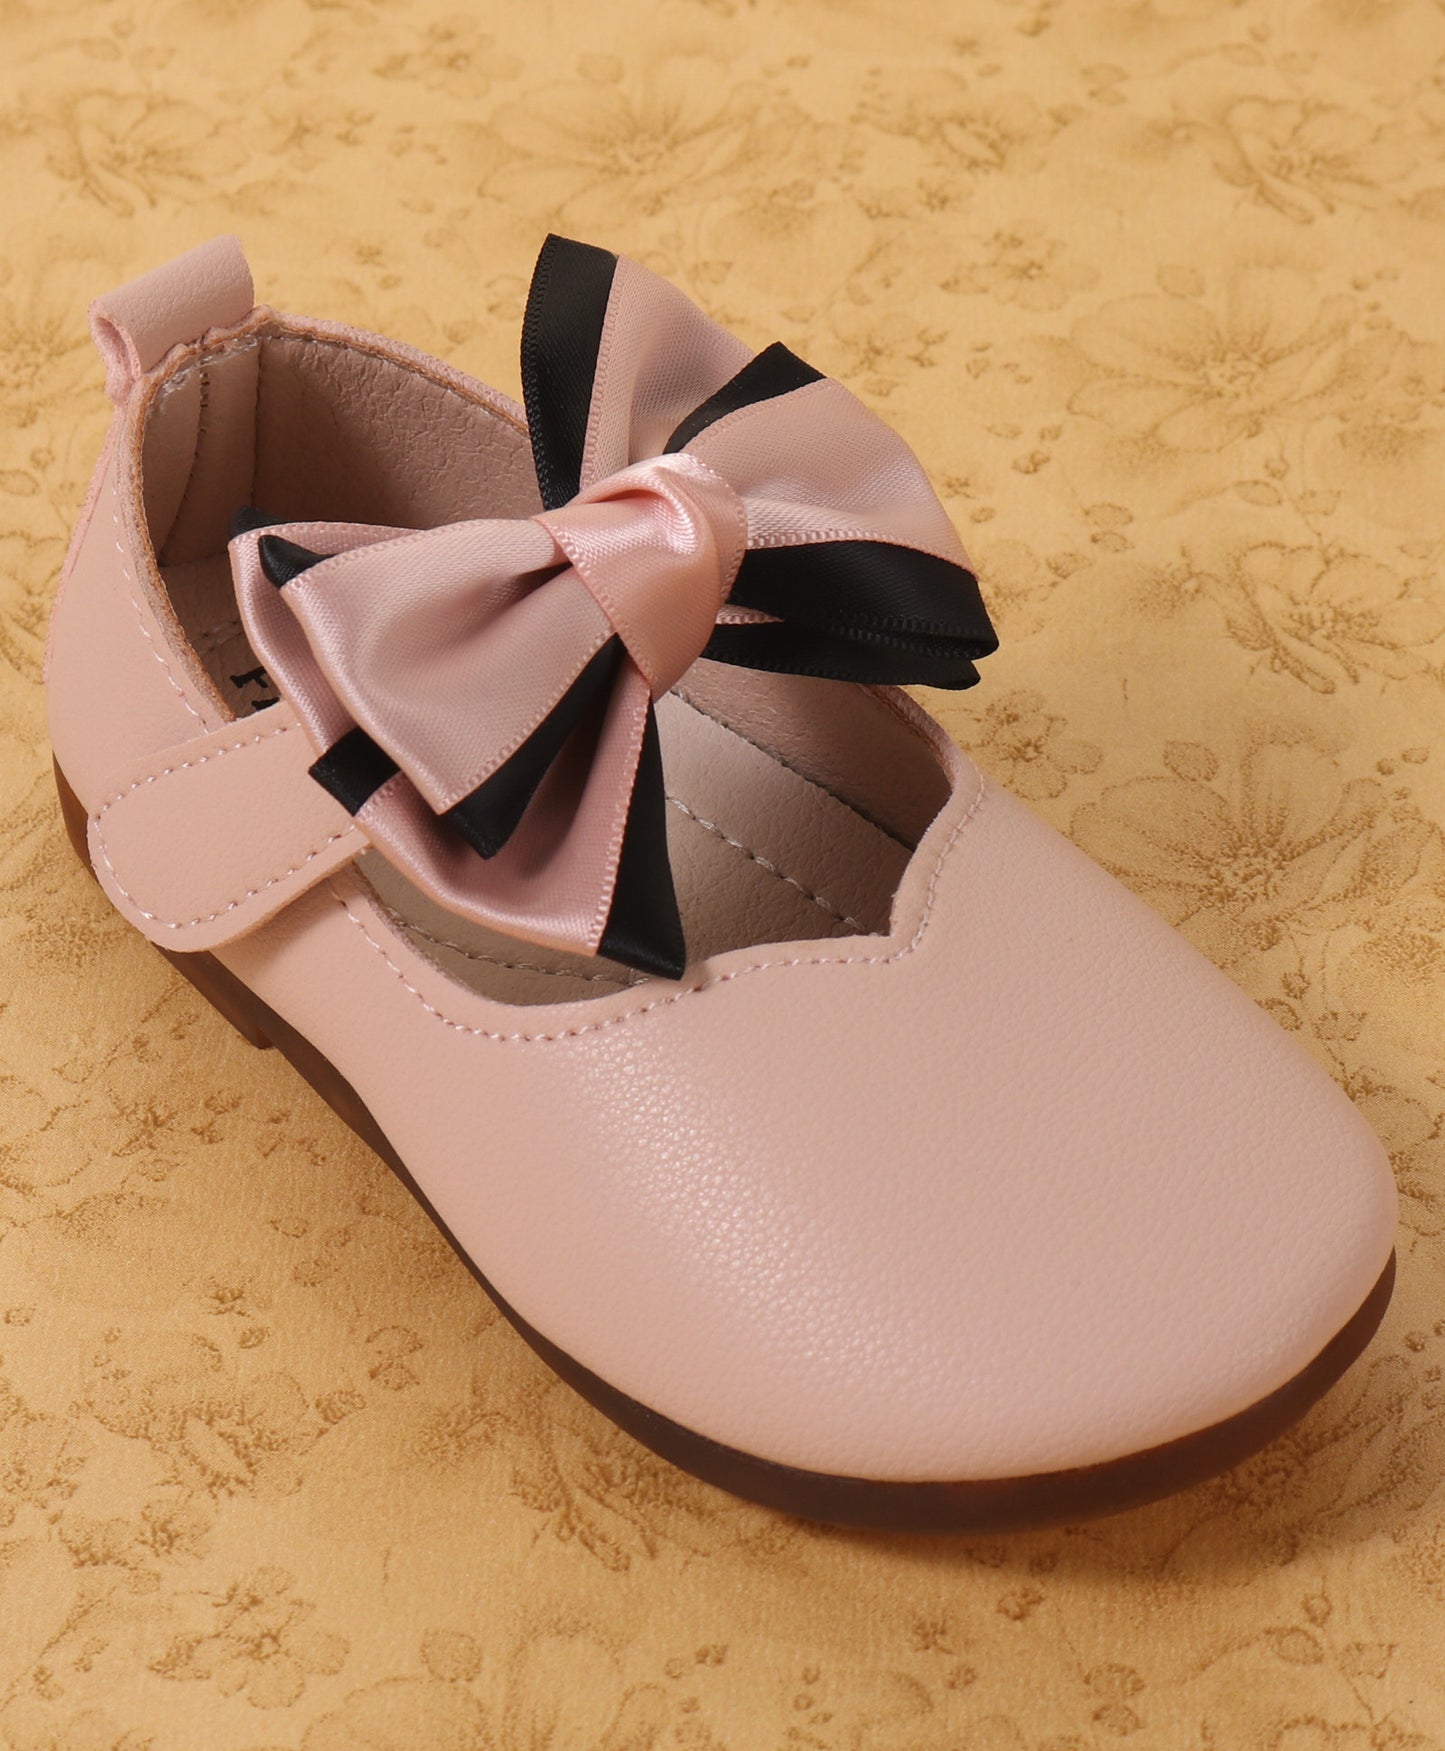 LAYERED BOW APPLIQUE VELCRO CLOSURE BELLIES - PINK